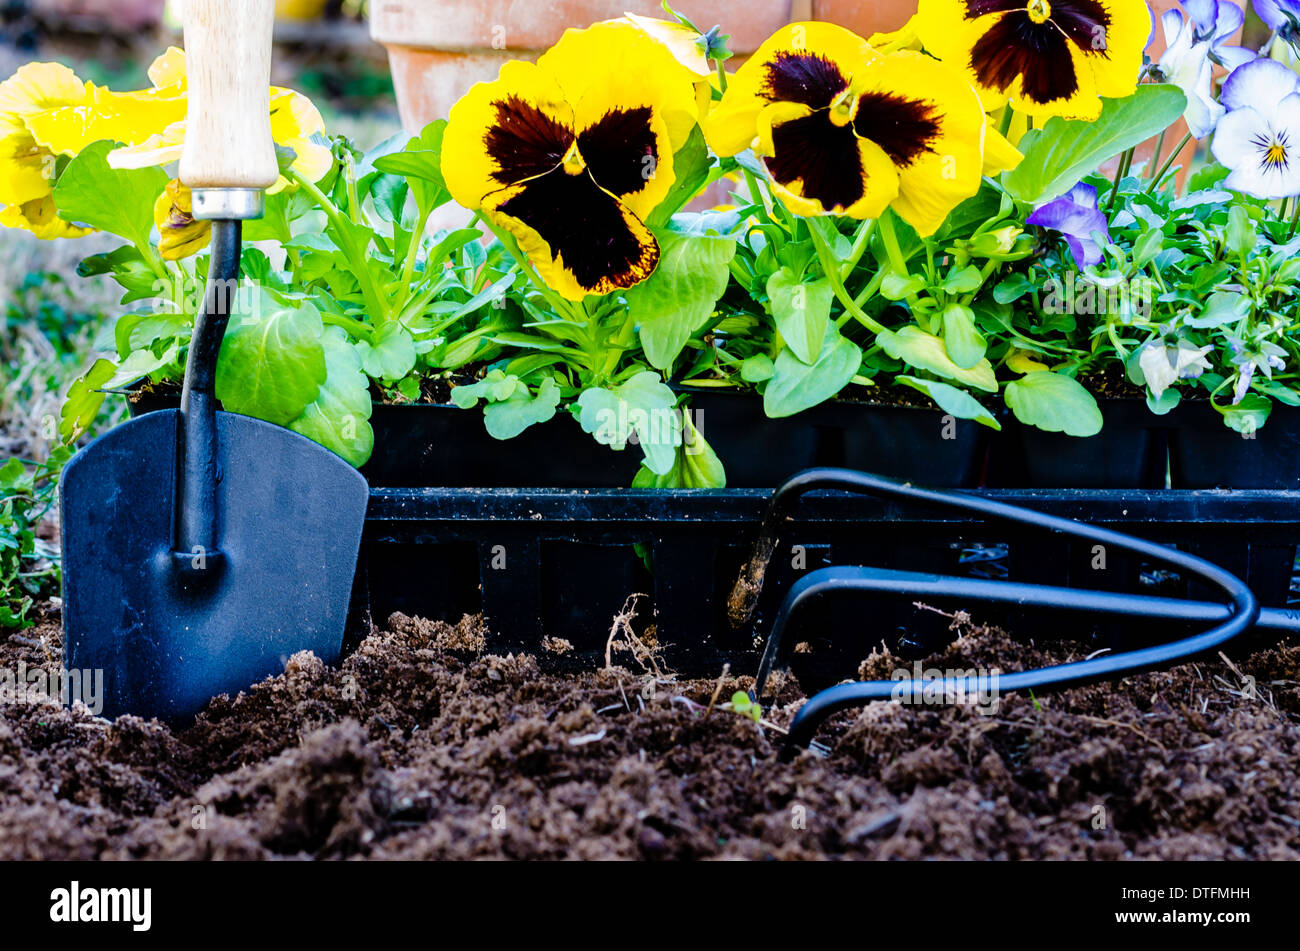 Planting flowers closeup. Closeup of pansies, violas, trowel, cultivator, and pots on cultivated soil. Stock Photo